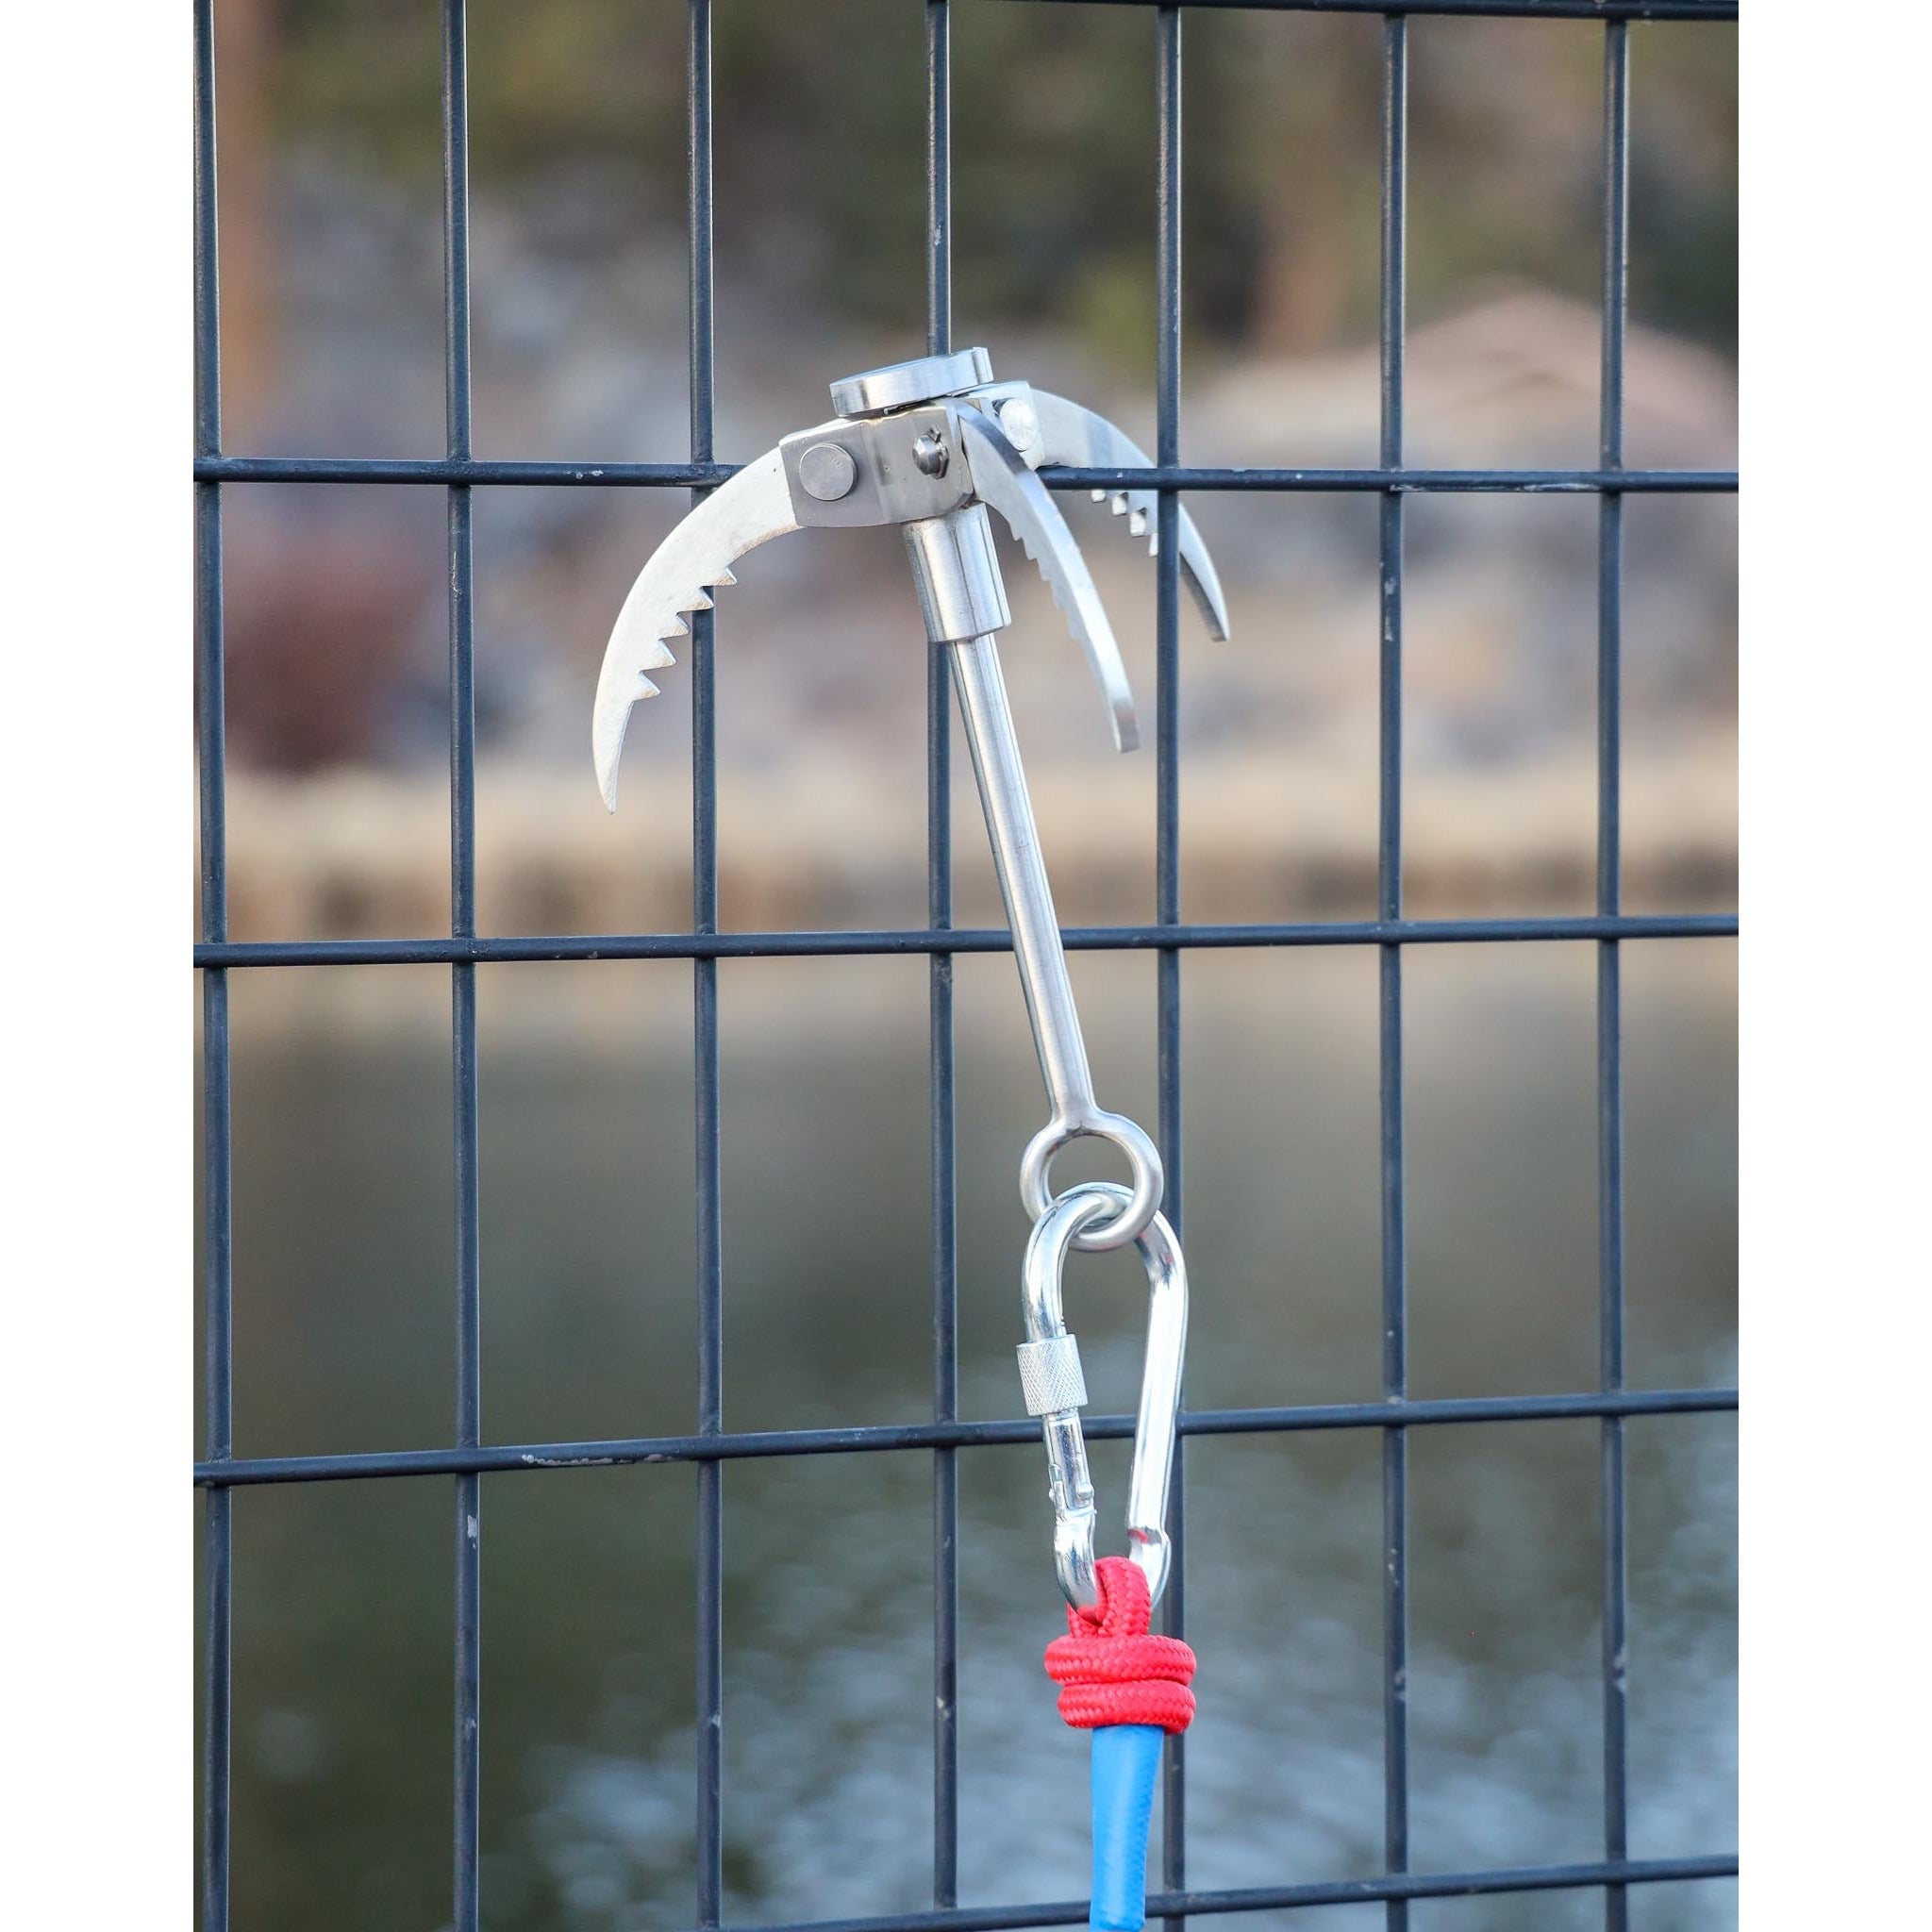 FOLDABLE GRAPPLING HOOK WITH SAWTOOTH PRONGS – Adventures With Purpose